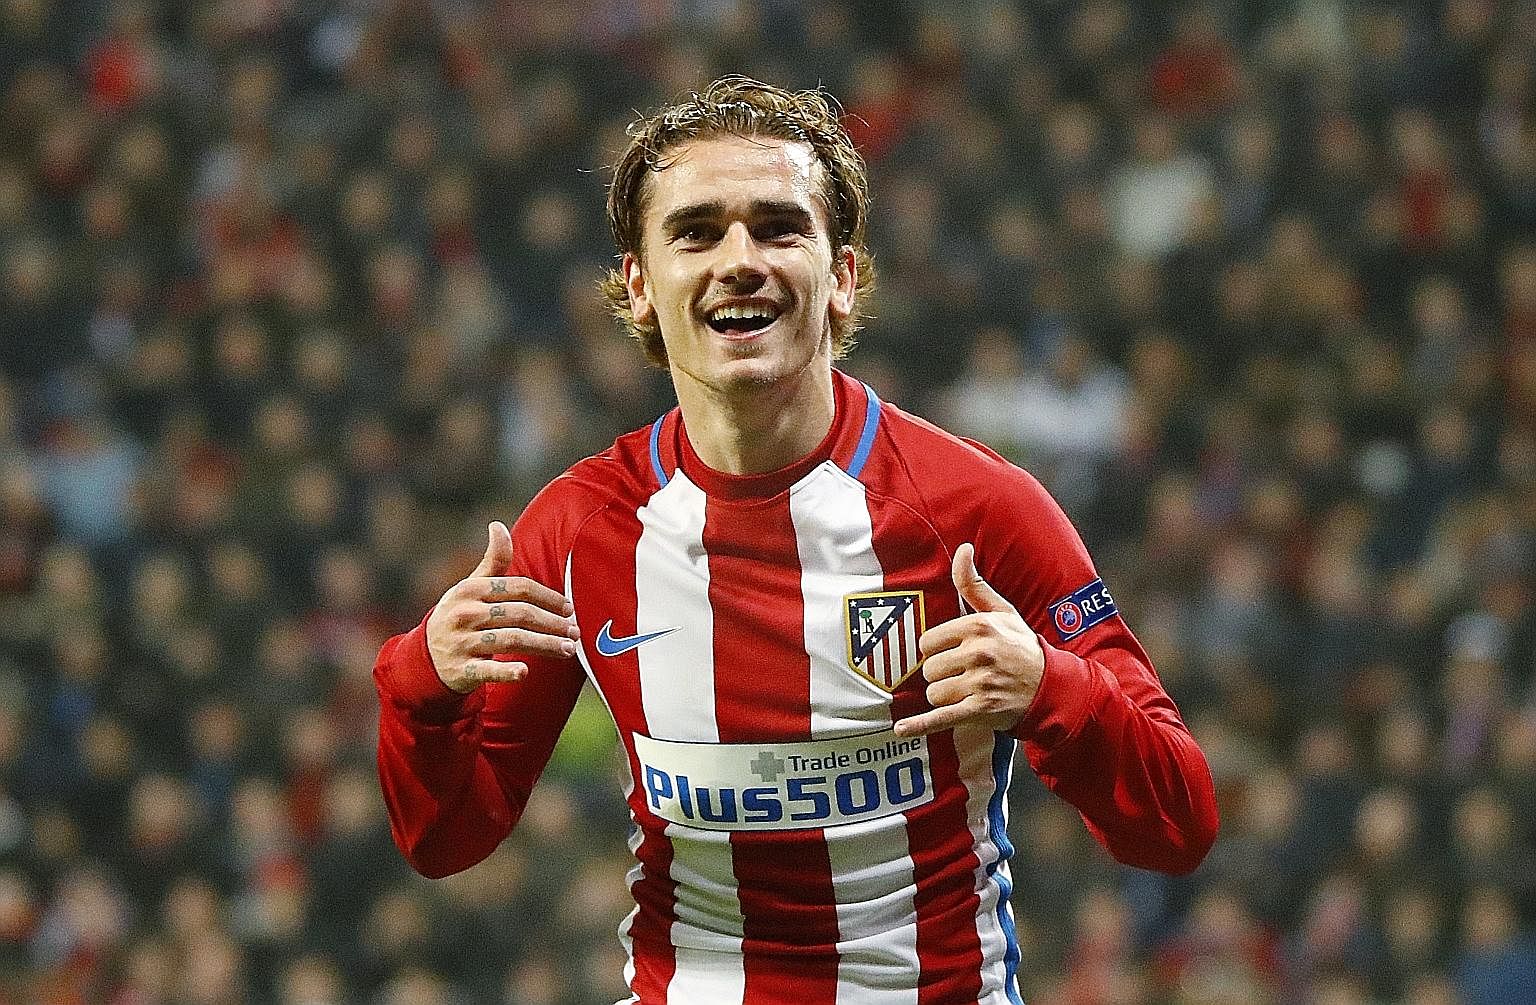 Atletico Madrid and France striker Antoine Griezmann is heavily linked with a move to Manchester United in the summer. His arrival is likely to result in United skipper Wayne Rooney leaving the English giants for China.